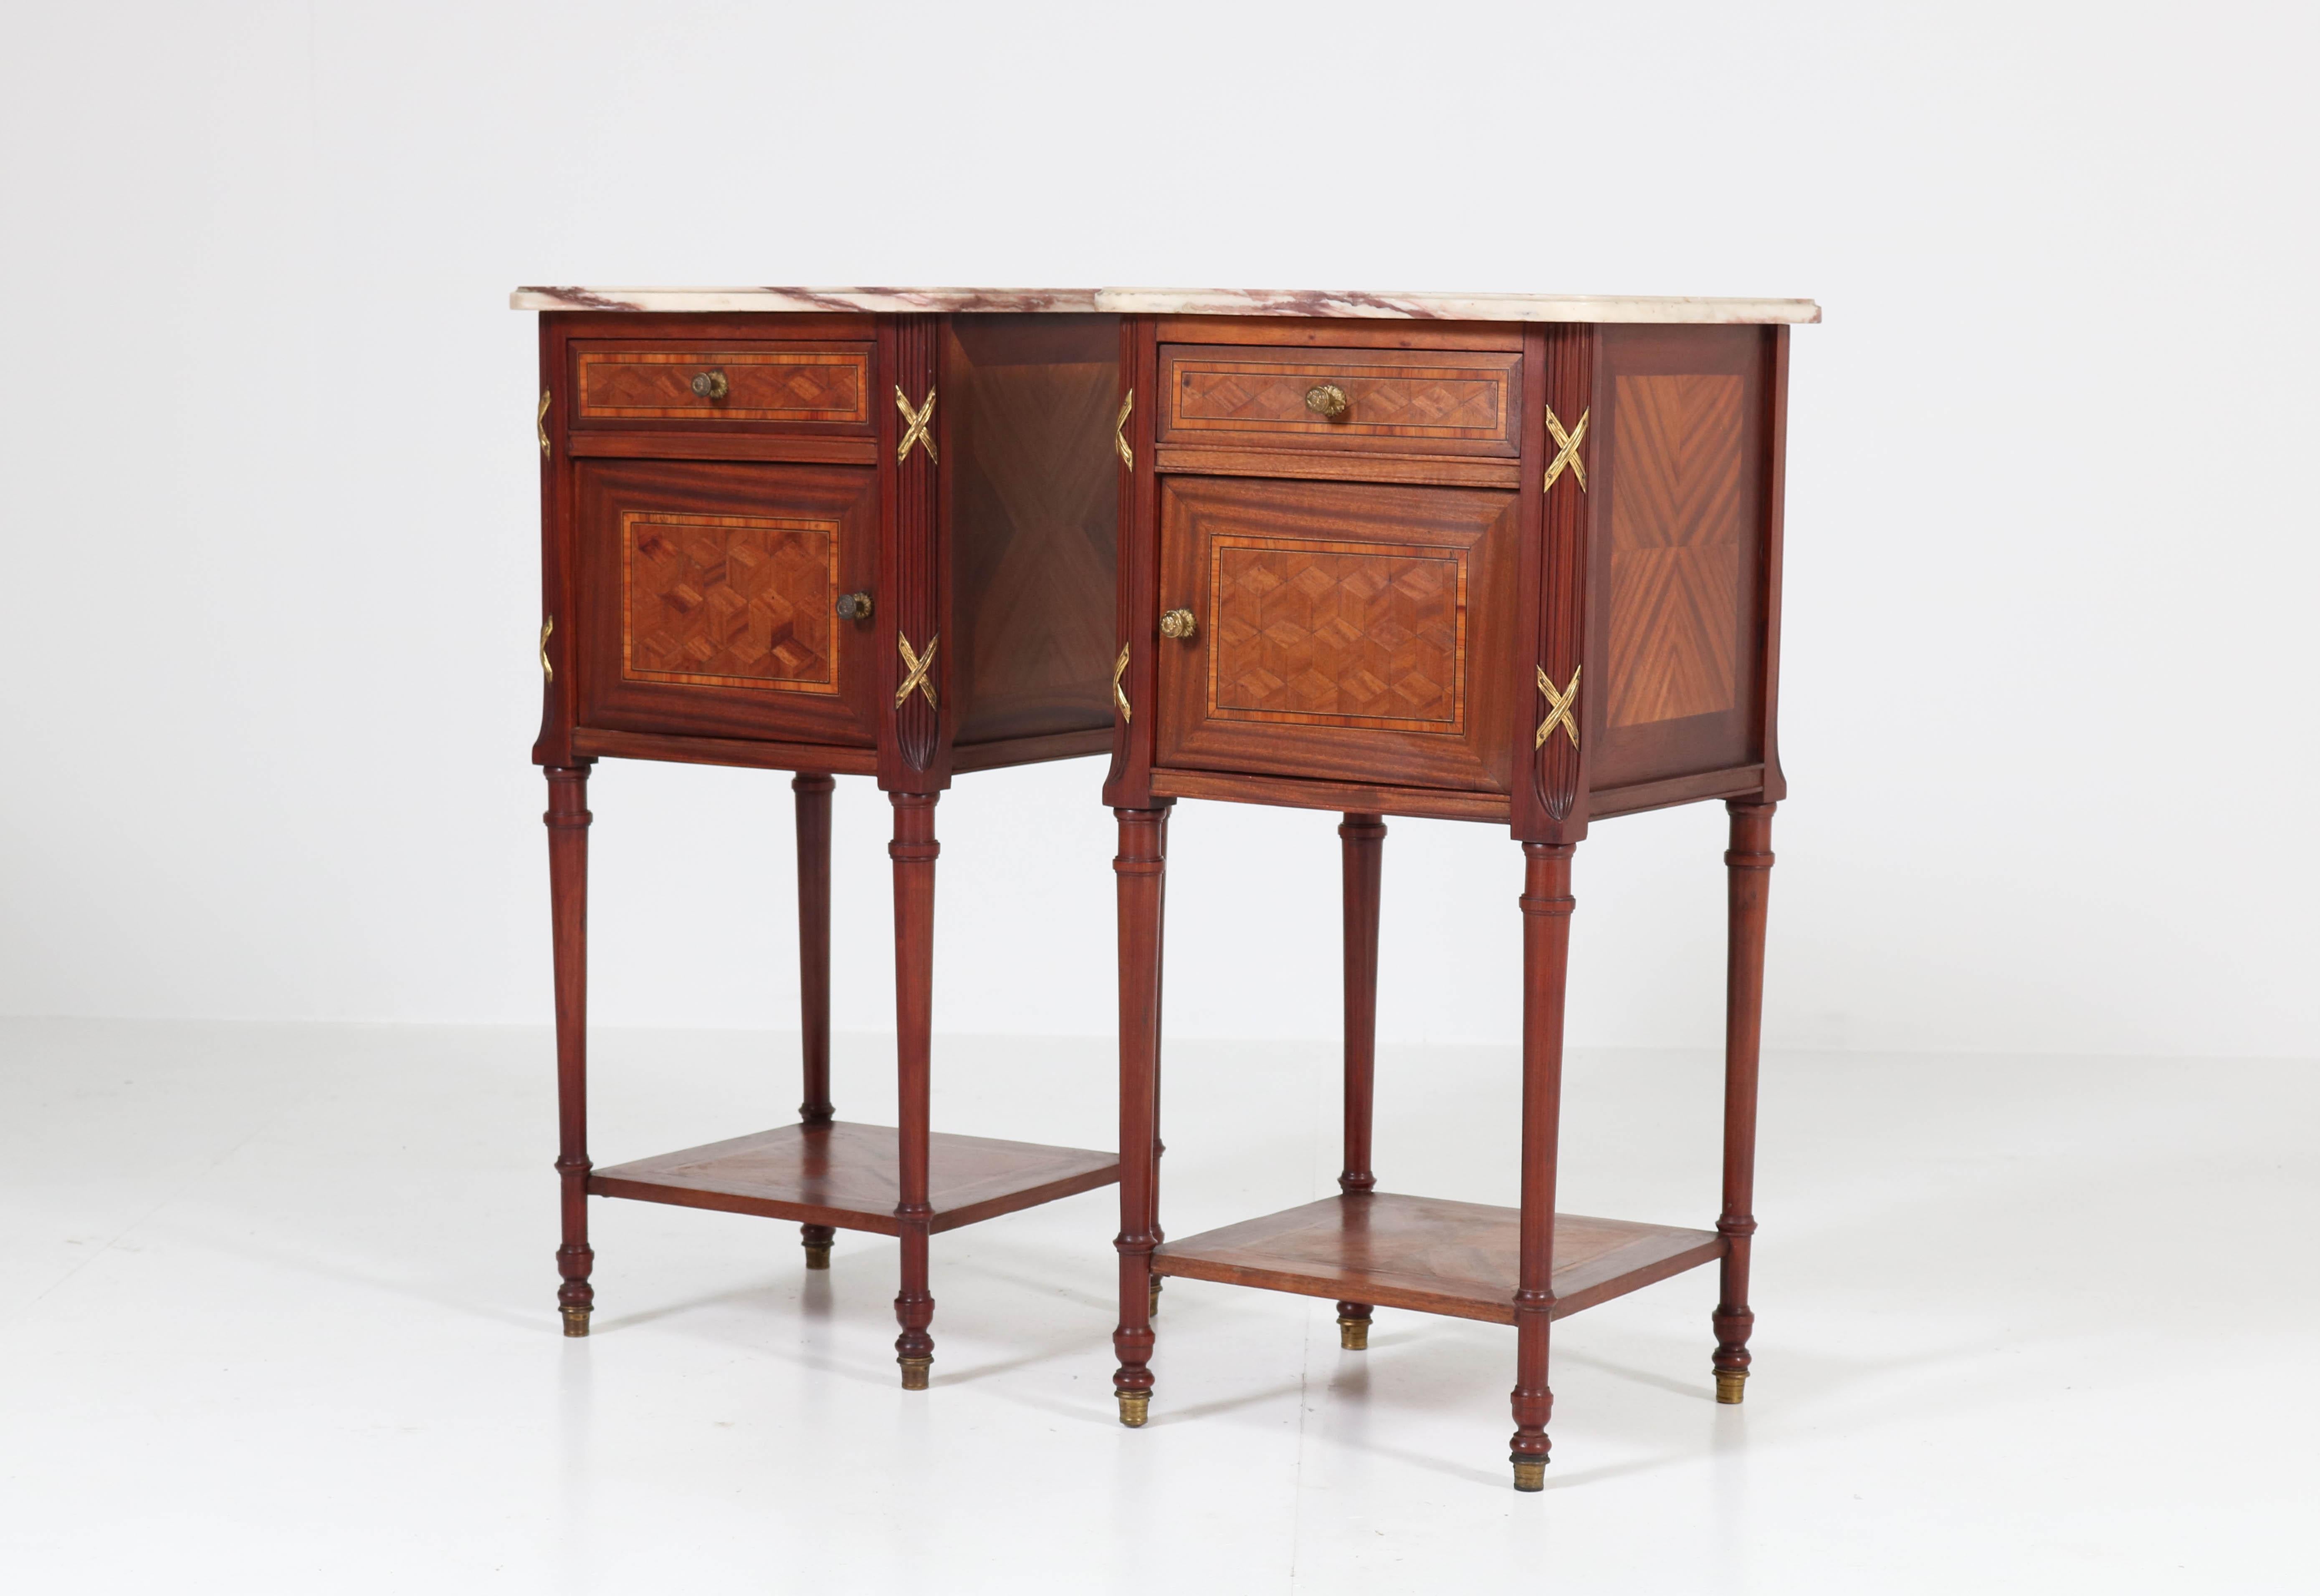 Stunning and elegant pair of Louis XV style nightstands or bedside tables.
Striking French design from the 1920s.
Mahogany with marquetry and bronze garniture.
Original marble tops.
In good original condition with minor wear consistent with age